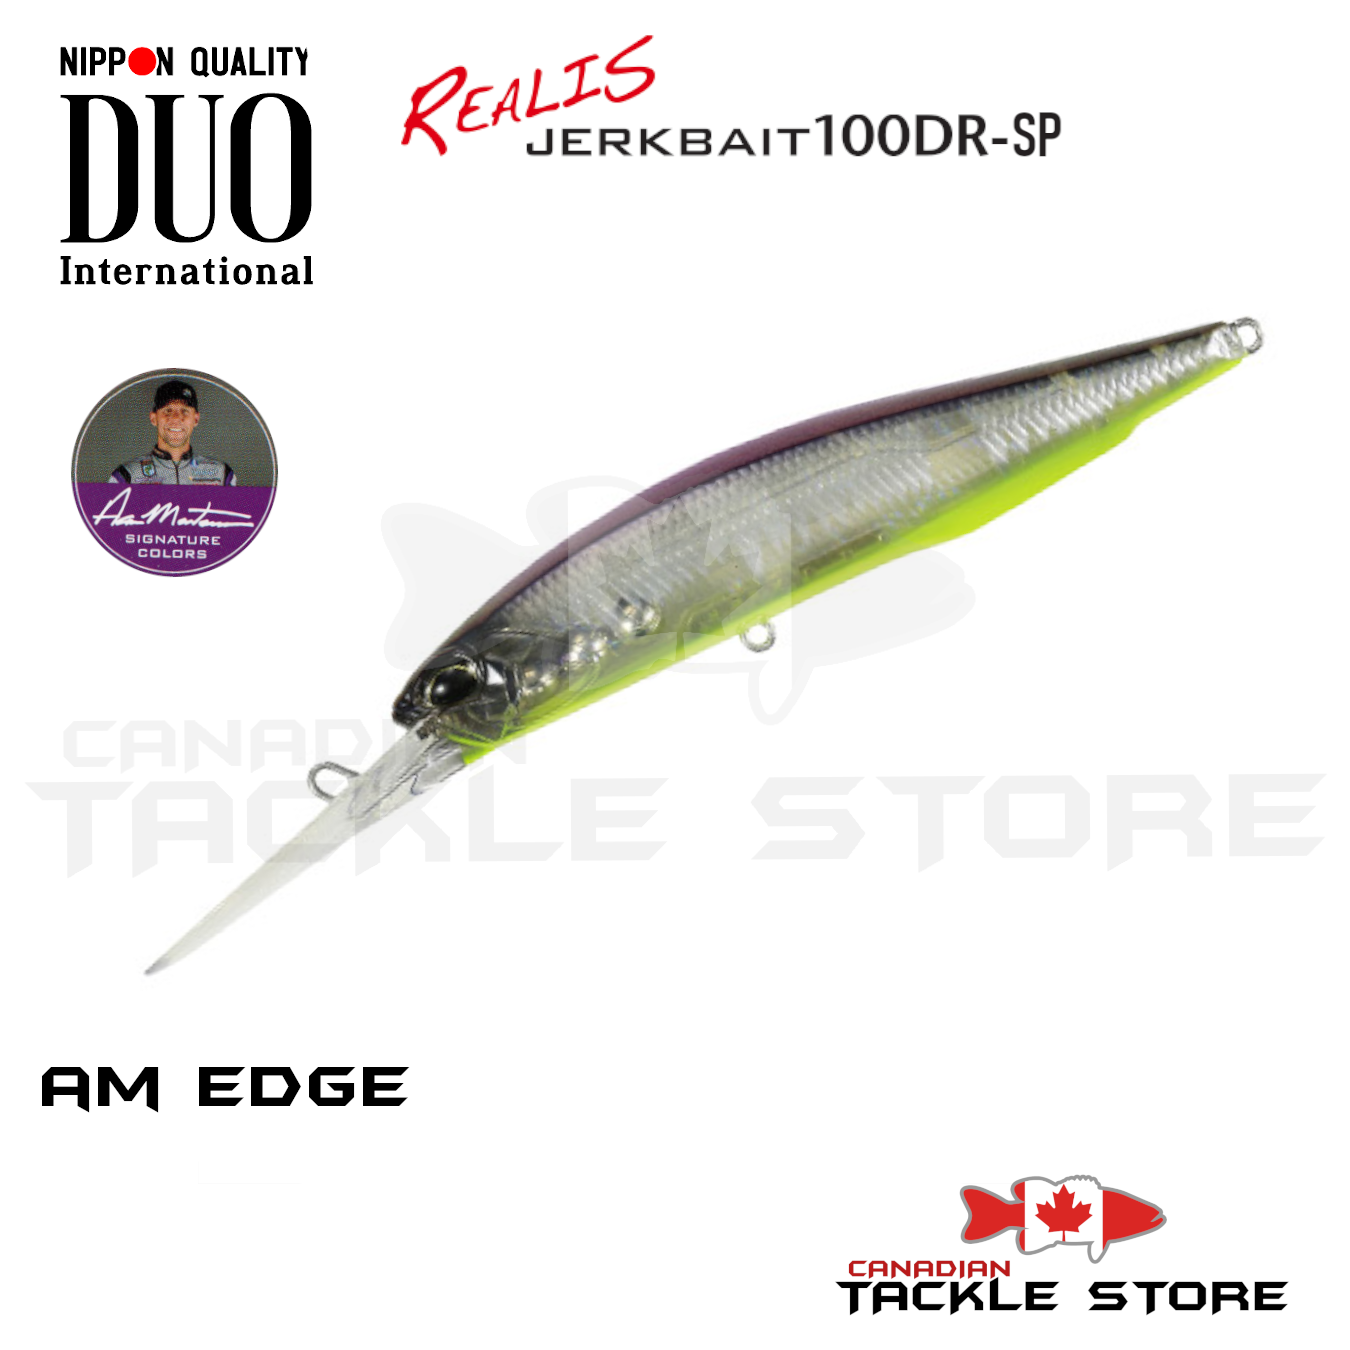 Duo Realis Jerkbait 100DR-SP – Canadian Tackle Store